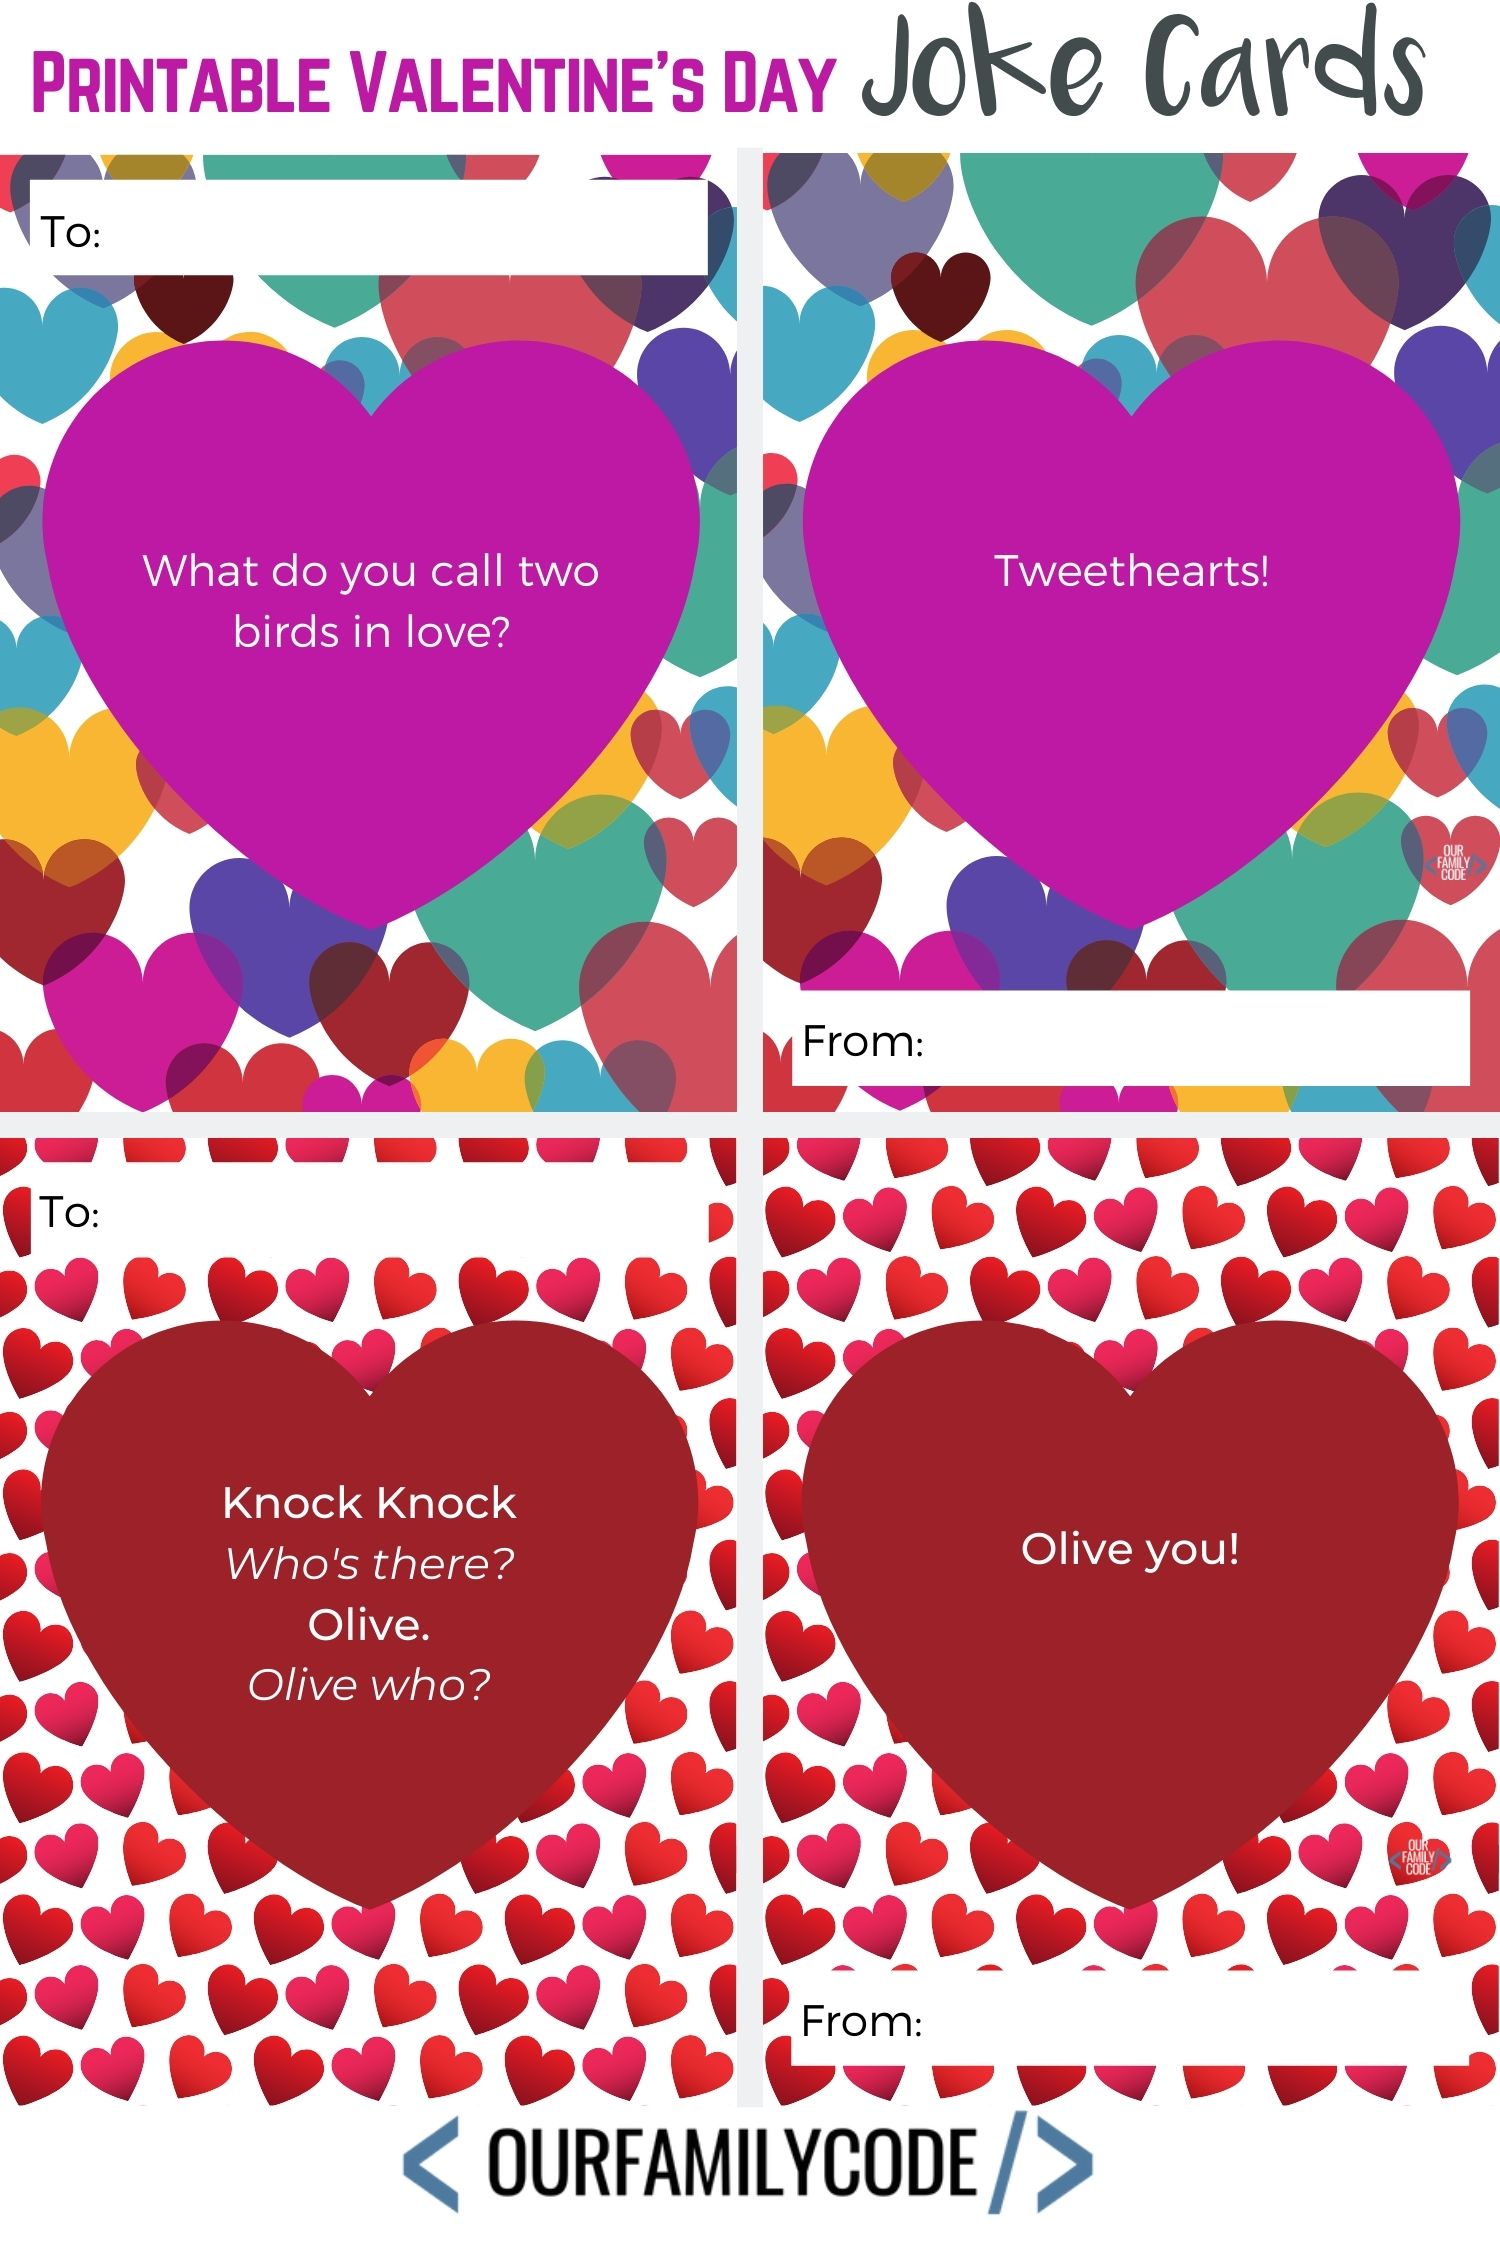 A picture of Free printable Valentine's Day joke cards.